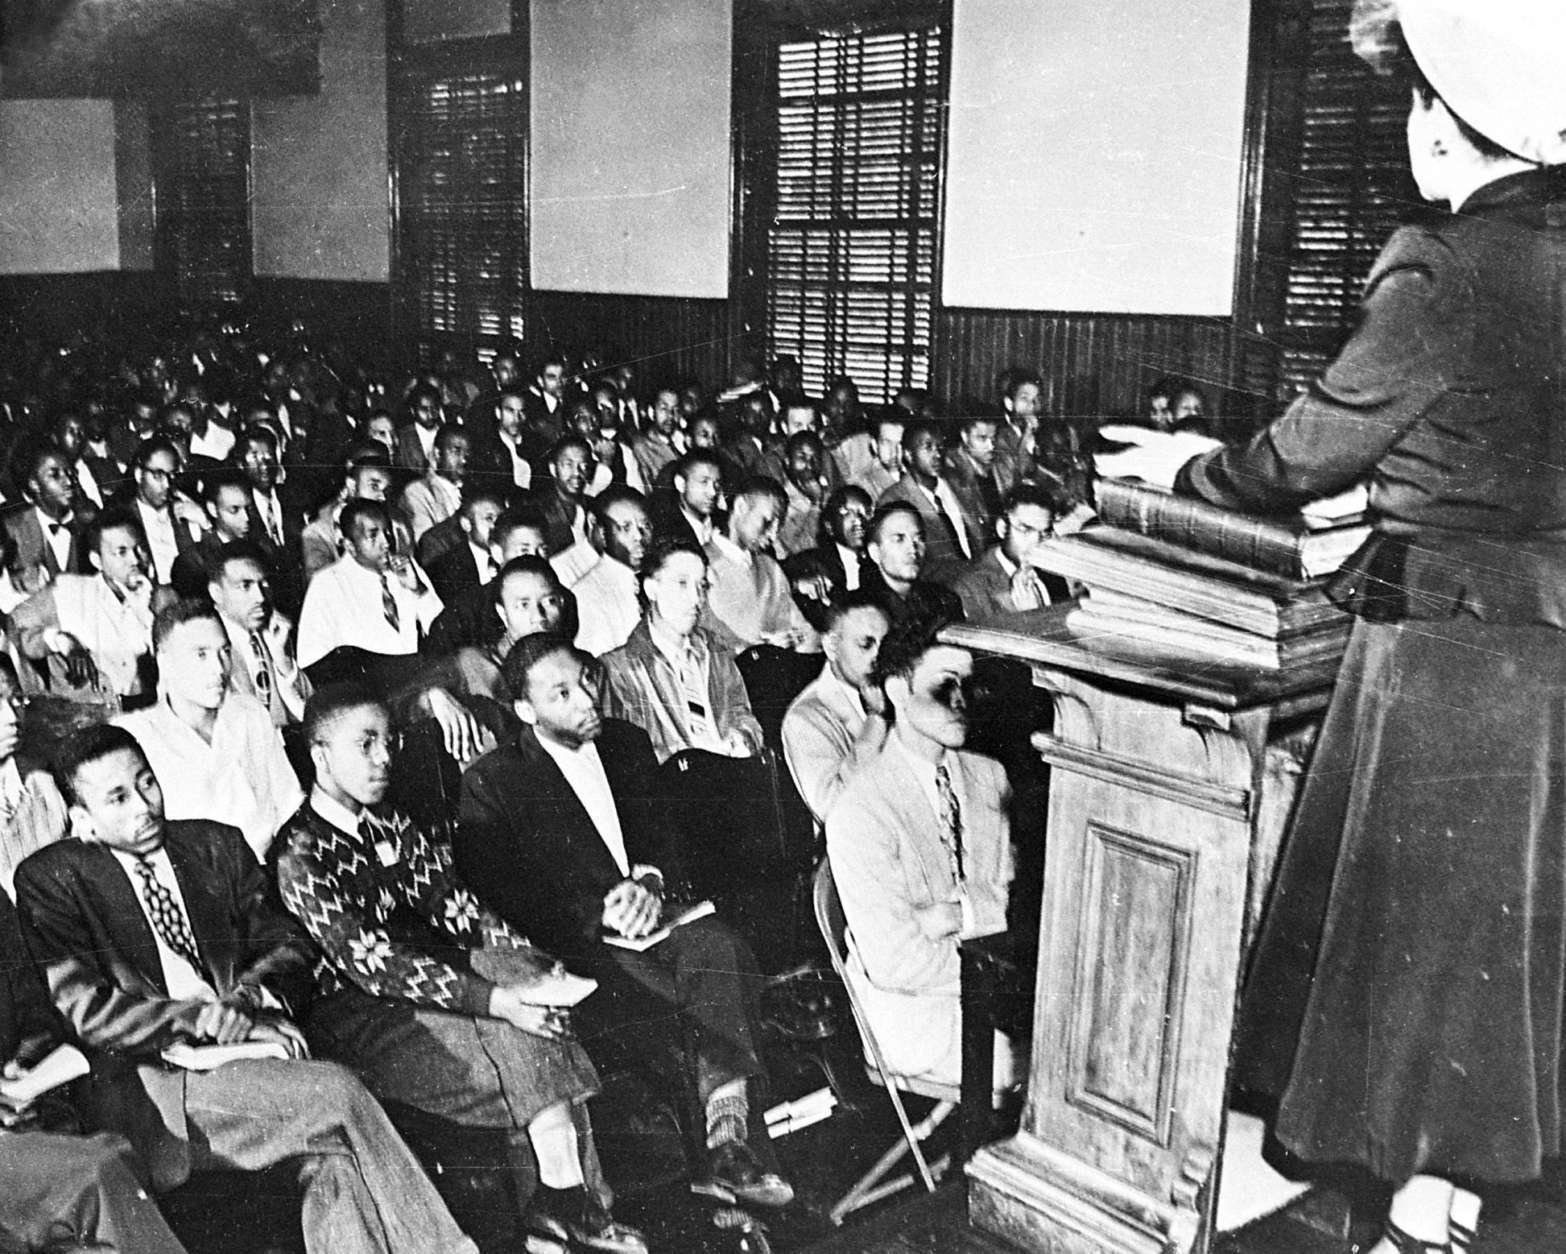 Martin Luther King, third from left, listens to a speaker during an assembly at Morehouse College, in Atlanta, GA, in 1948. King subsequently graduated from the college with a Bachelor of Arts degree in Sociology. (AP Photo)